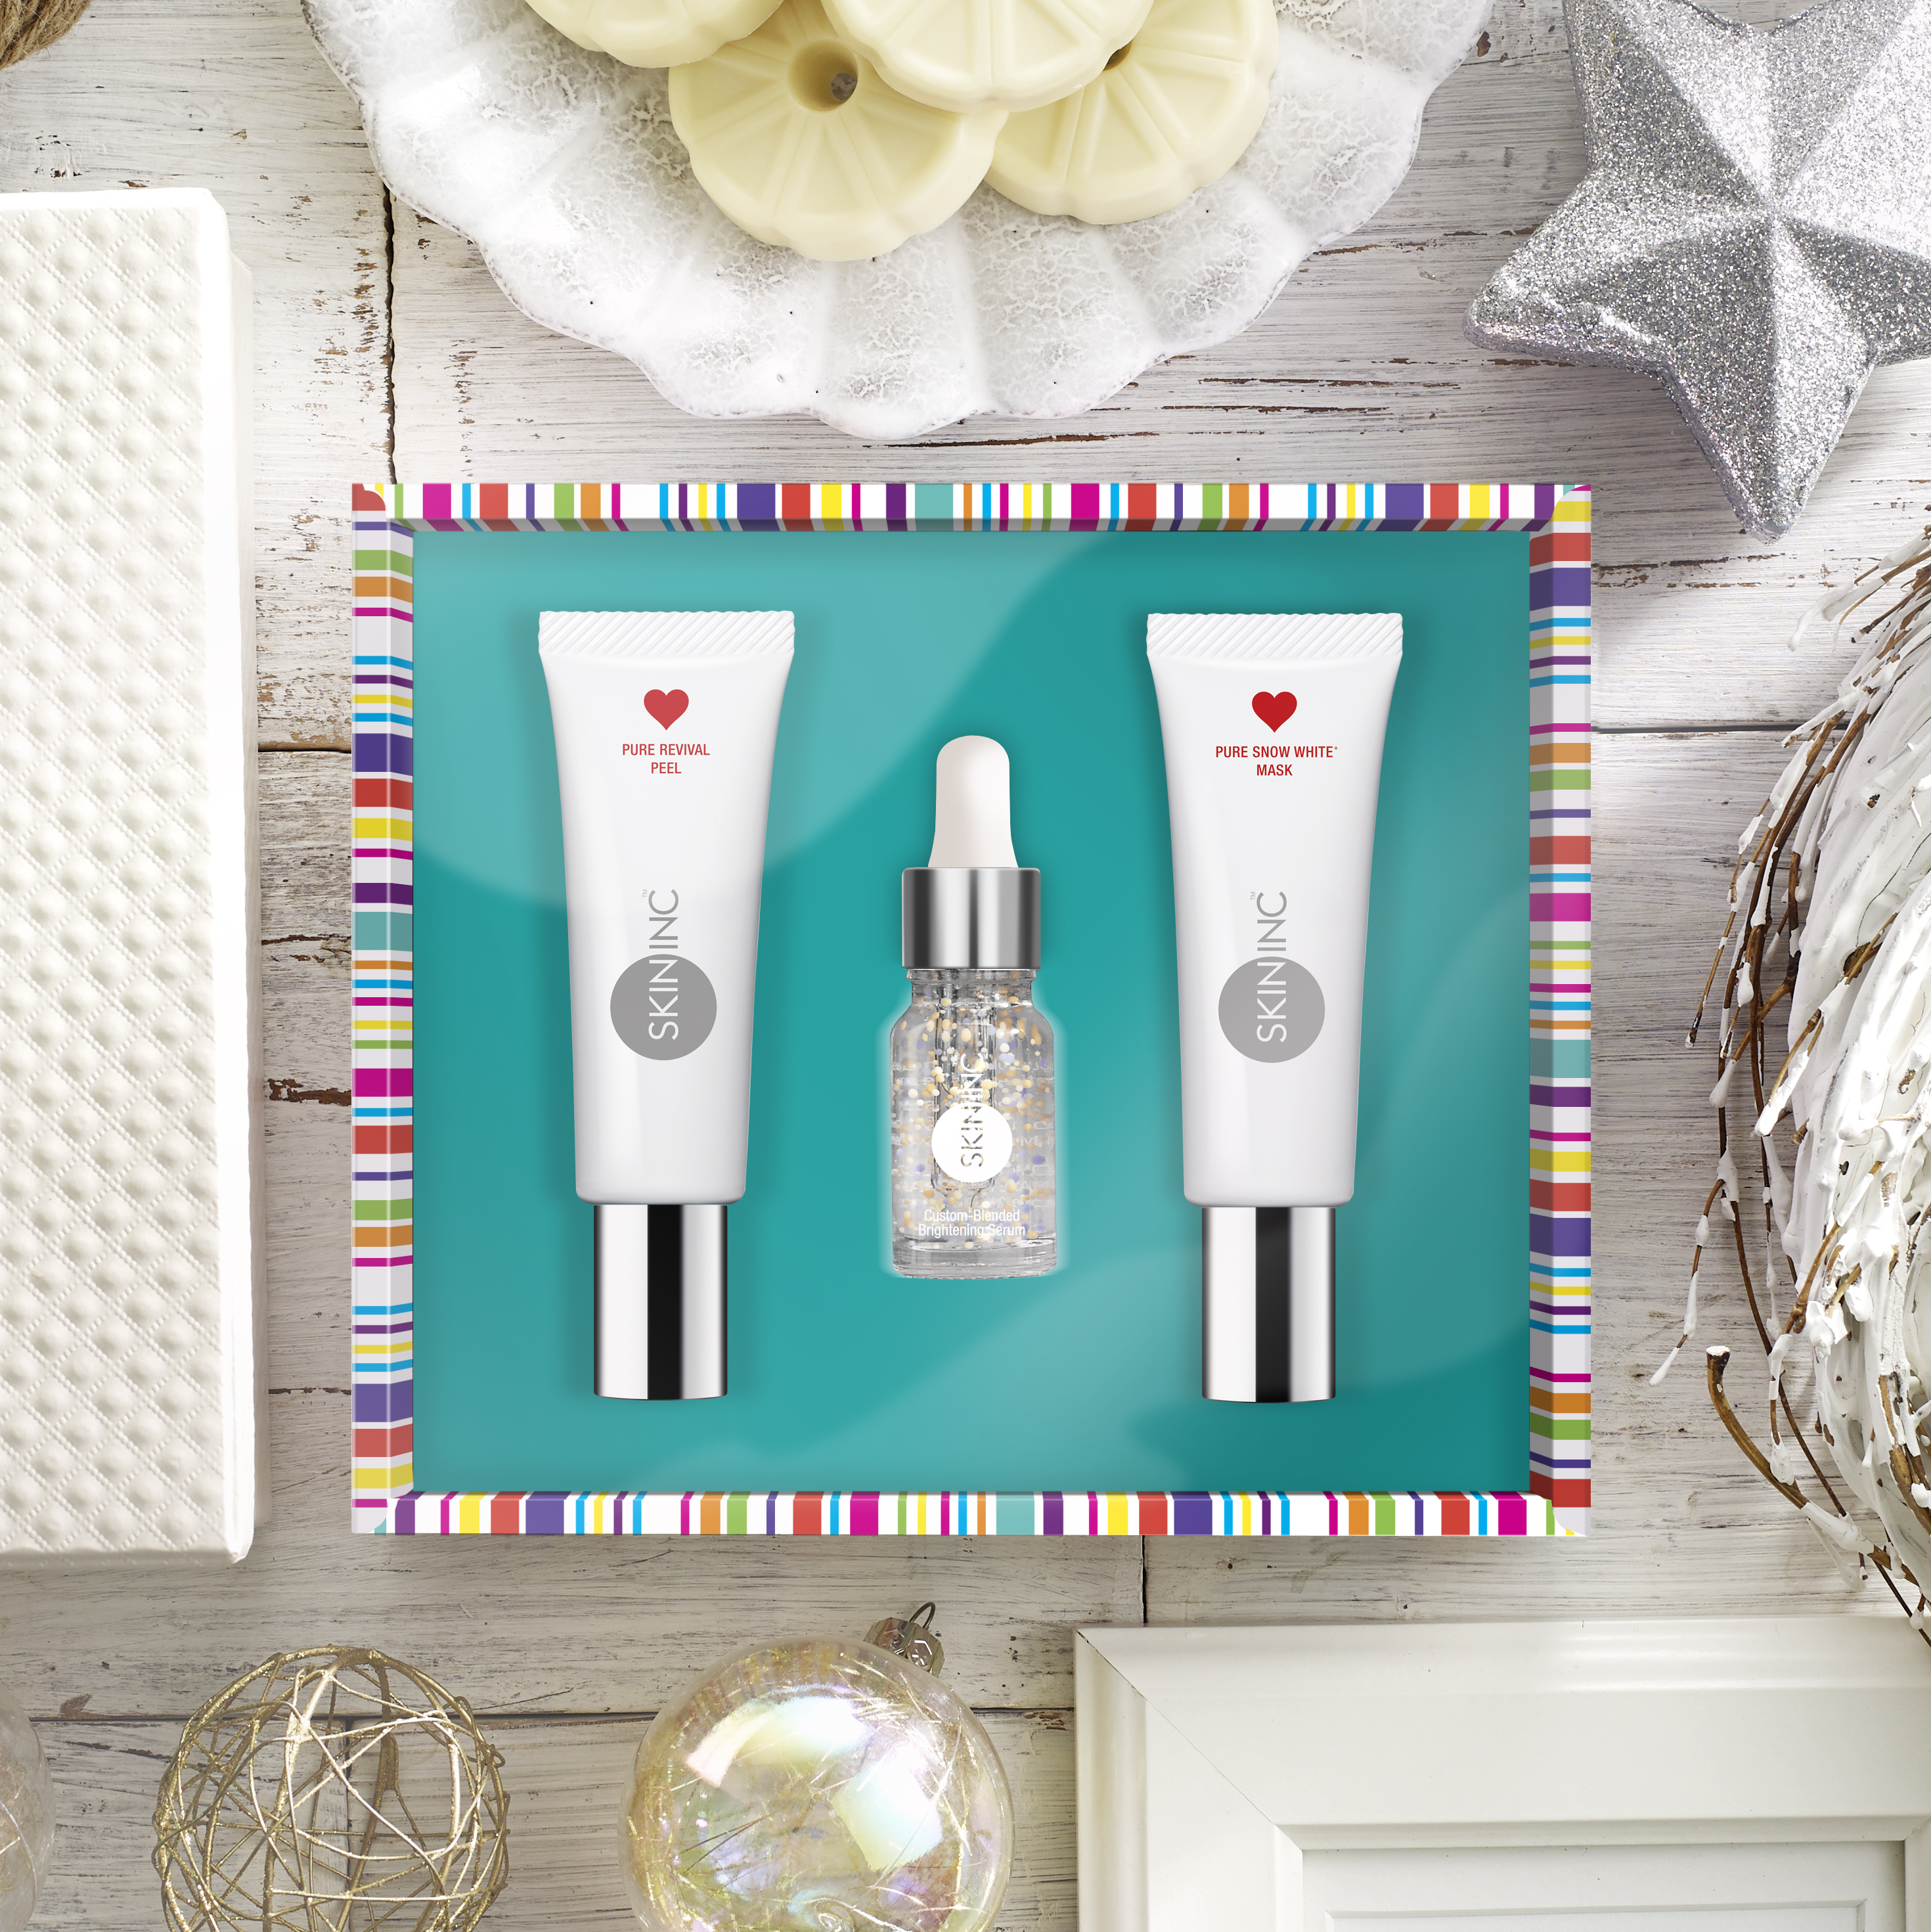 Limited Edition Gift Sets for Glowing Skin This Winter